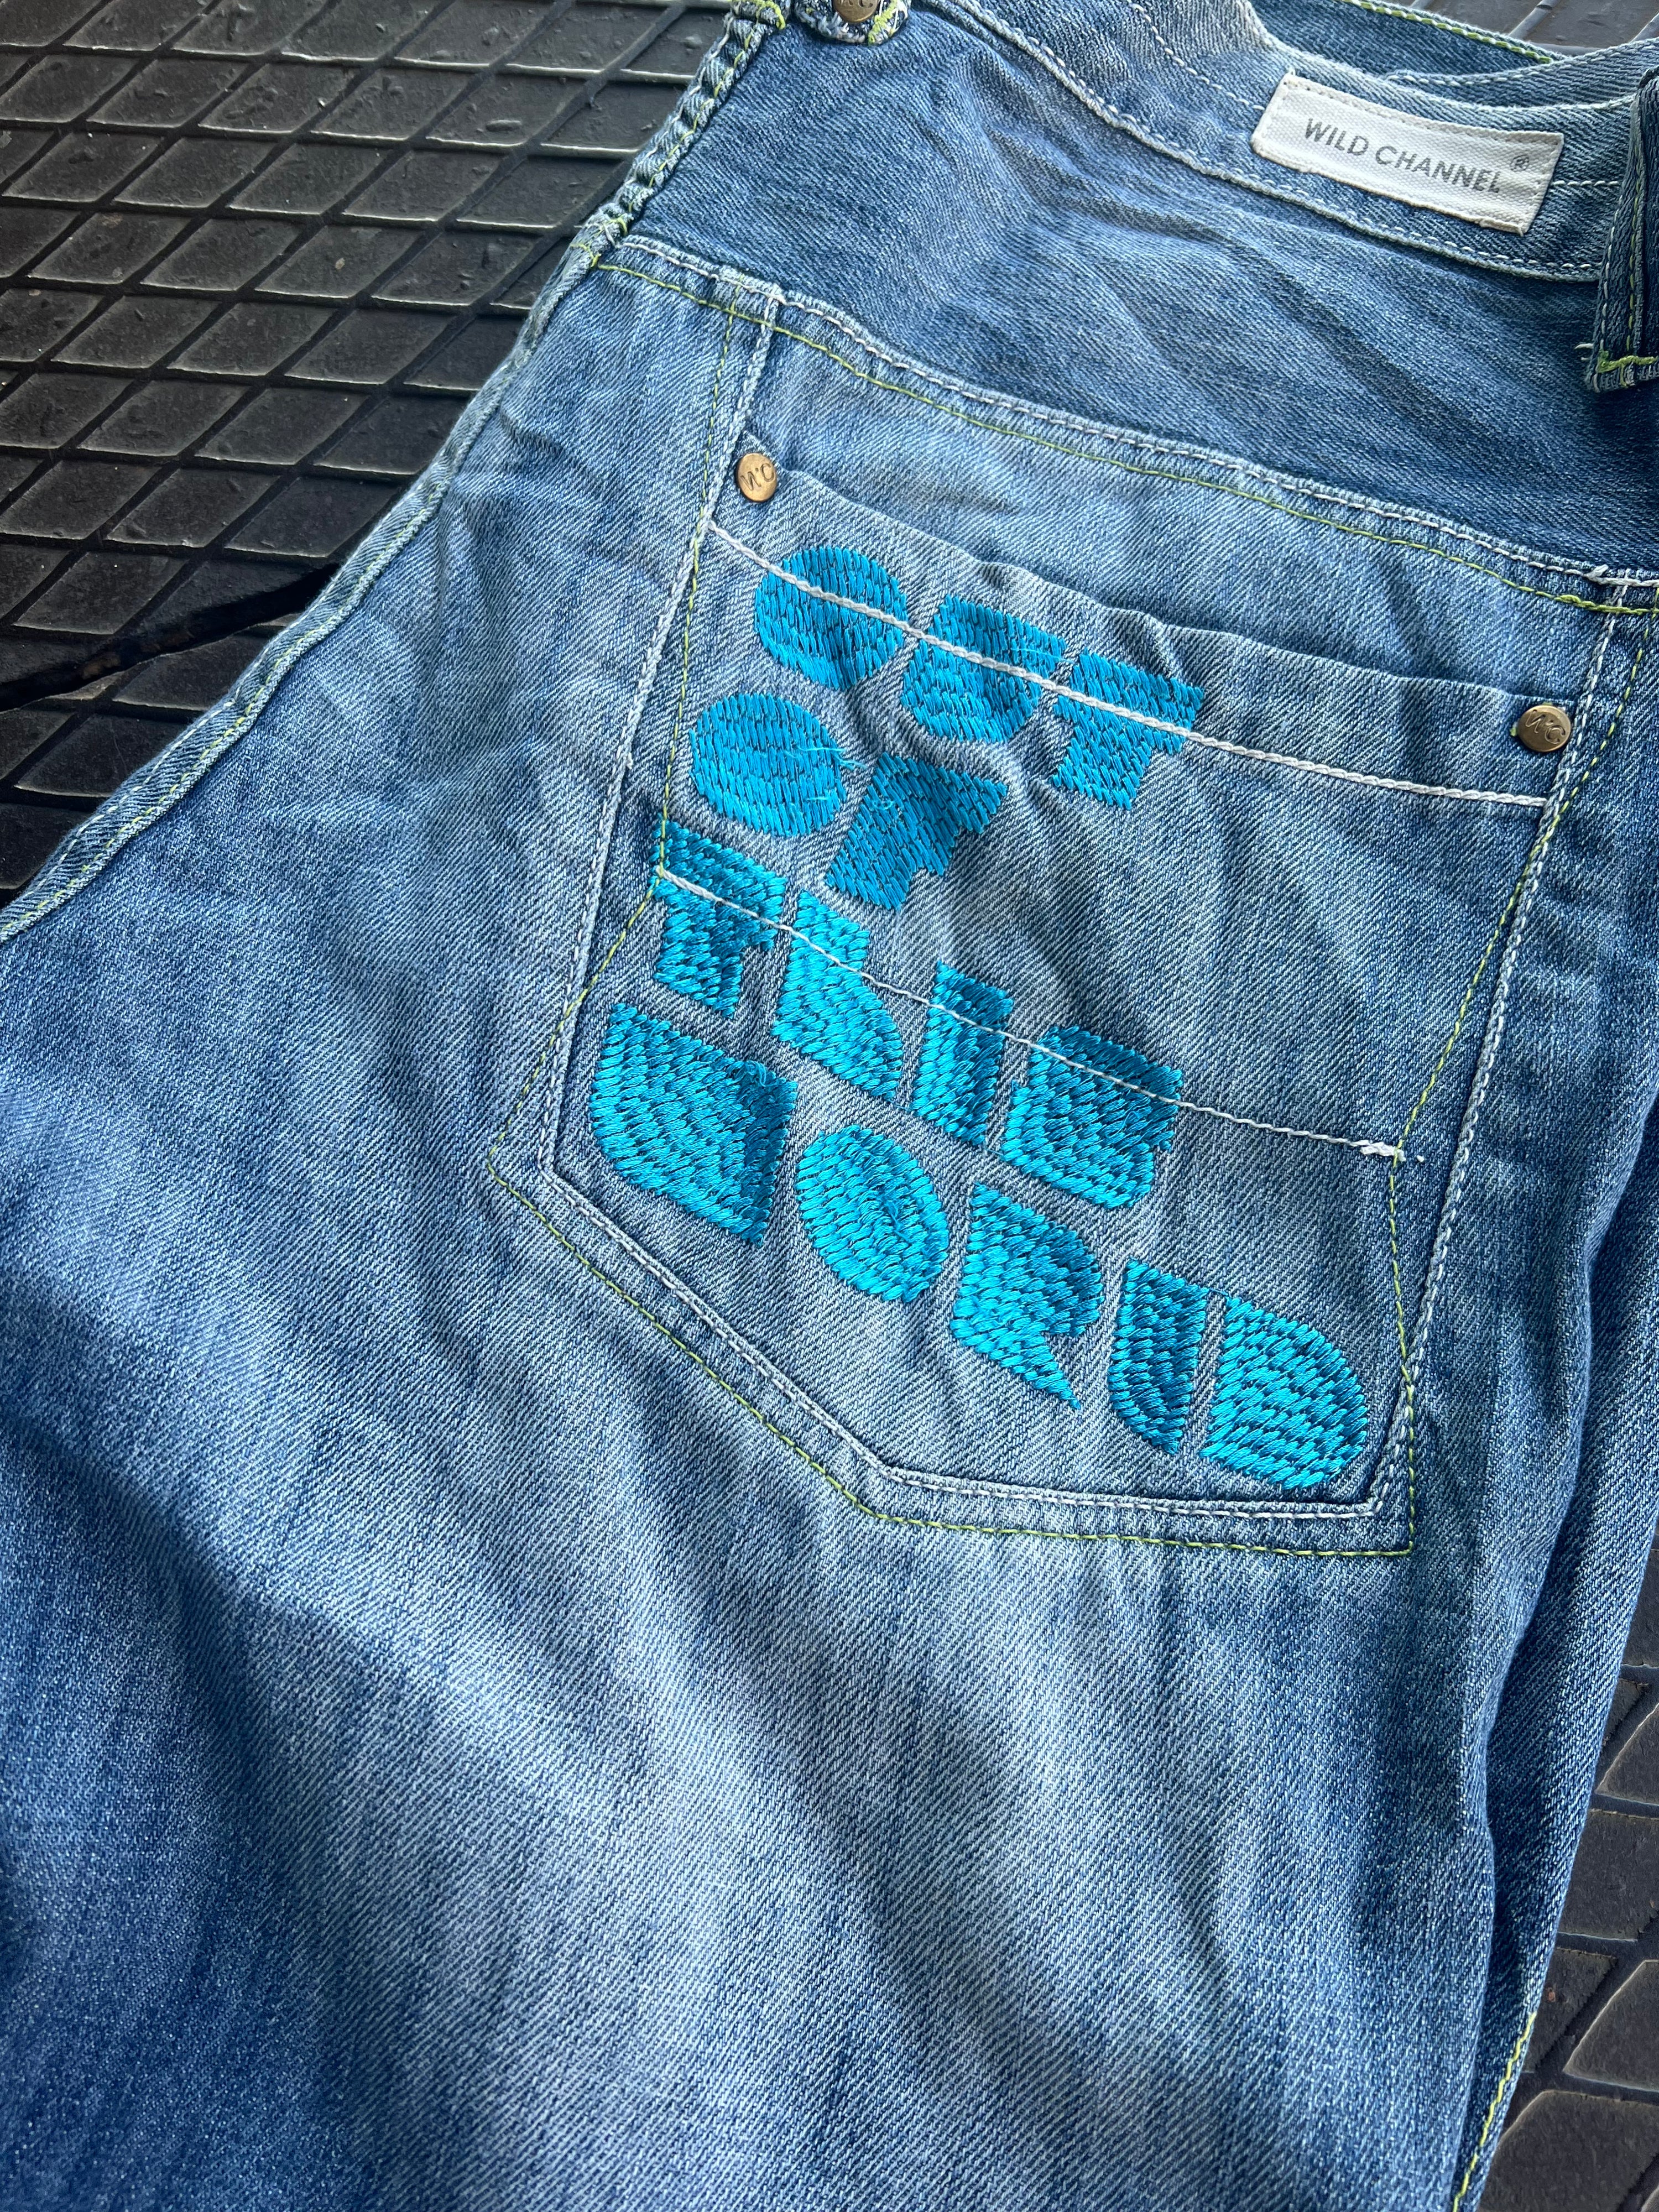 38 - Wild Channel "Out of this World" Blue Denim Shorts